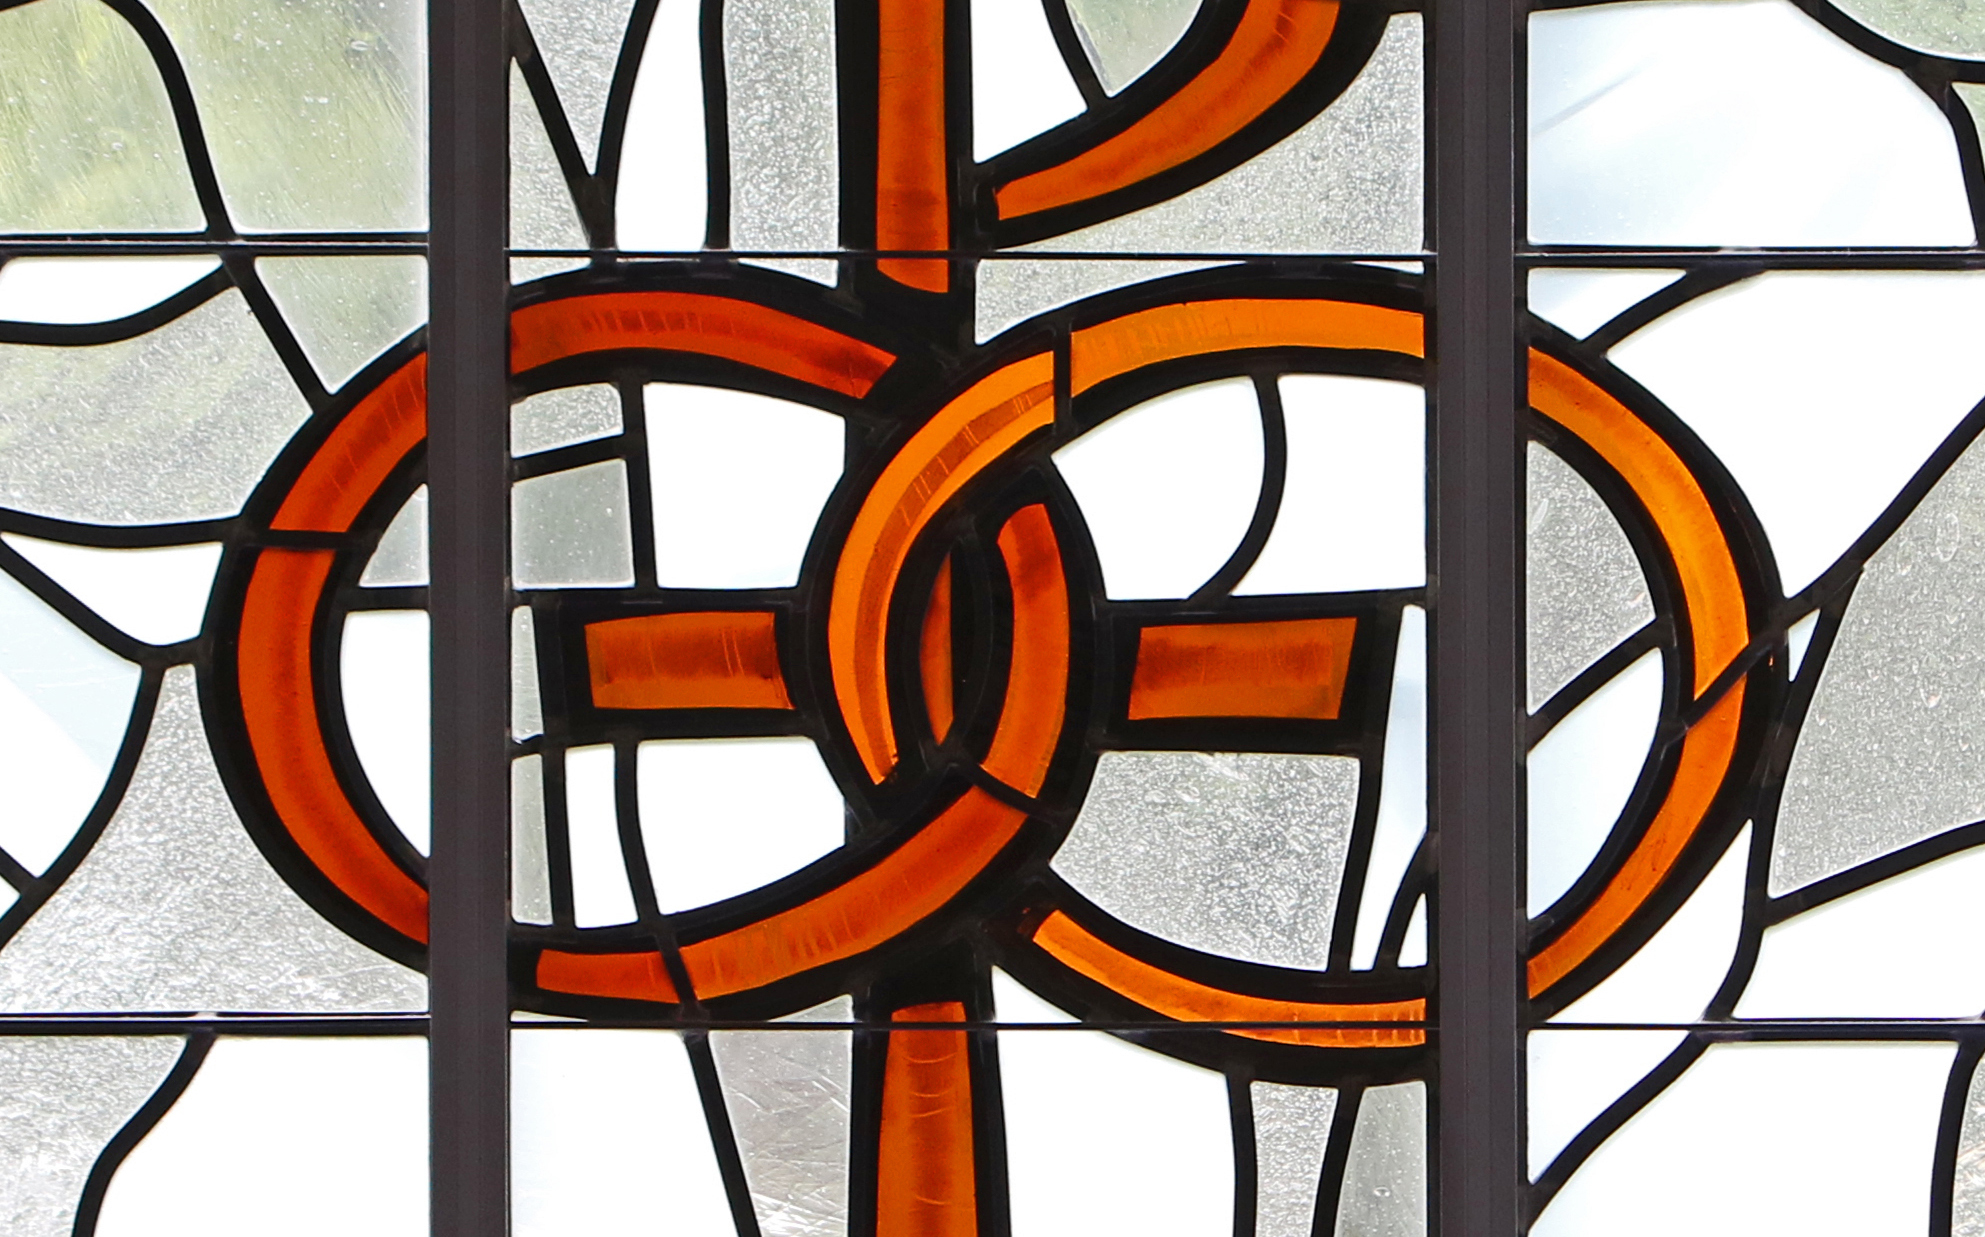 A pair of wedding bands symbolizing the sacrament of marriage is depicted in a stained-glass window in this CNS file photo. (CNS/Gregory A. Shemitz) 